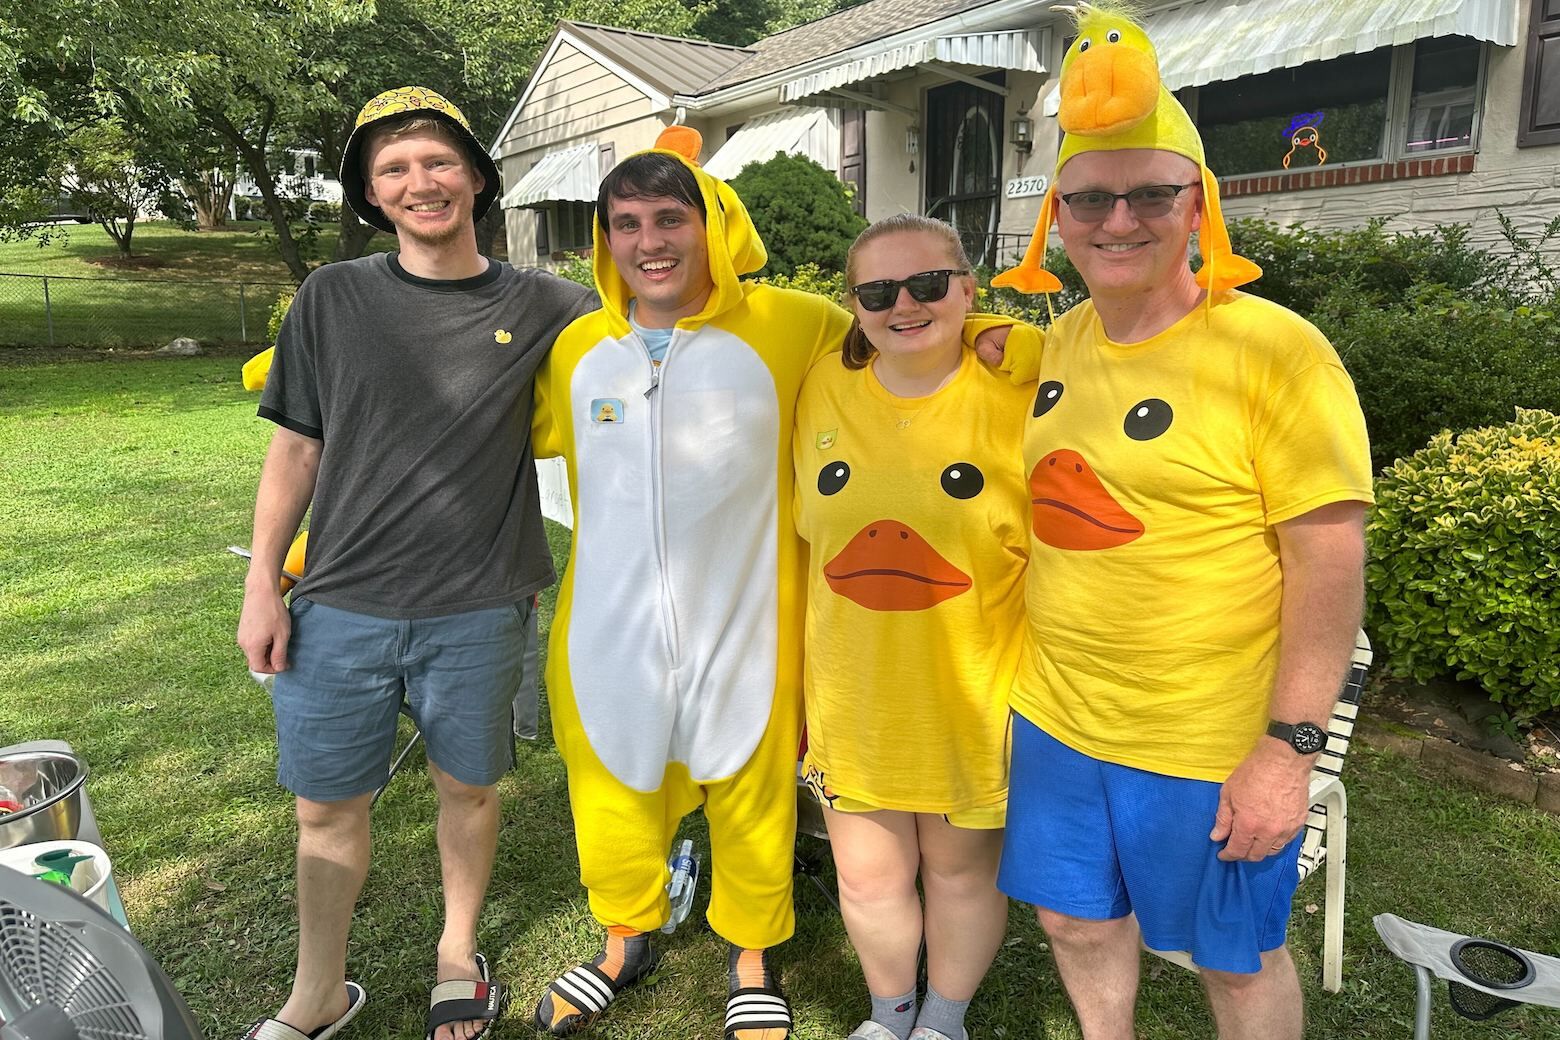 <p>Others who live in Leonardtown say this is the busiest things have been in a while.</p>
<p>&#8220;We don&#8217;t normally see this many people around here,&#8221; Chandler Moore said.</p>
<p>The Moore family live in a house just a block from the Leonardtown Wharf where the event took place.</p>
